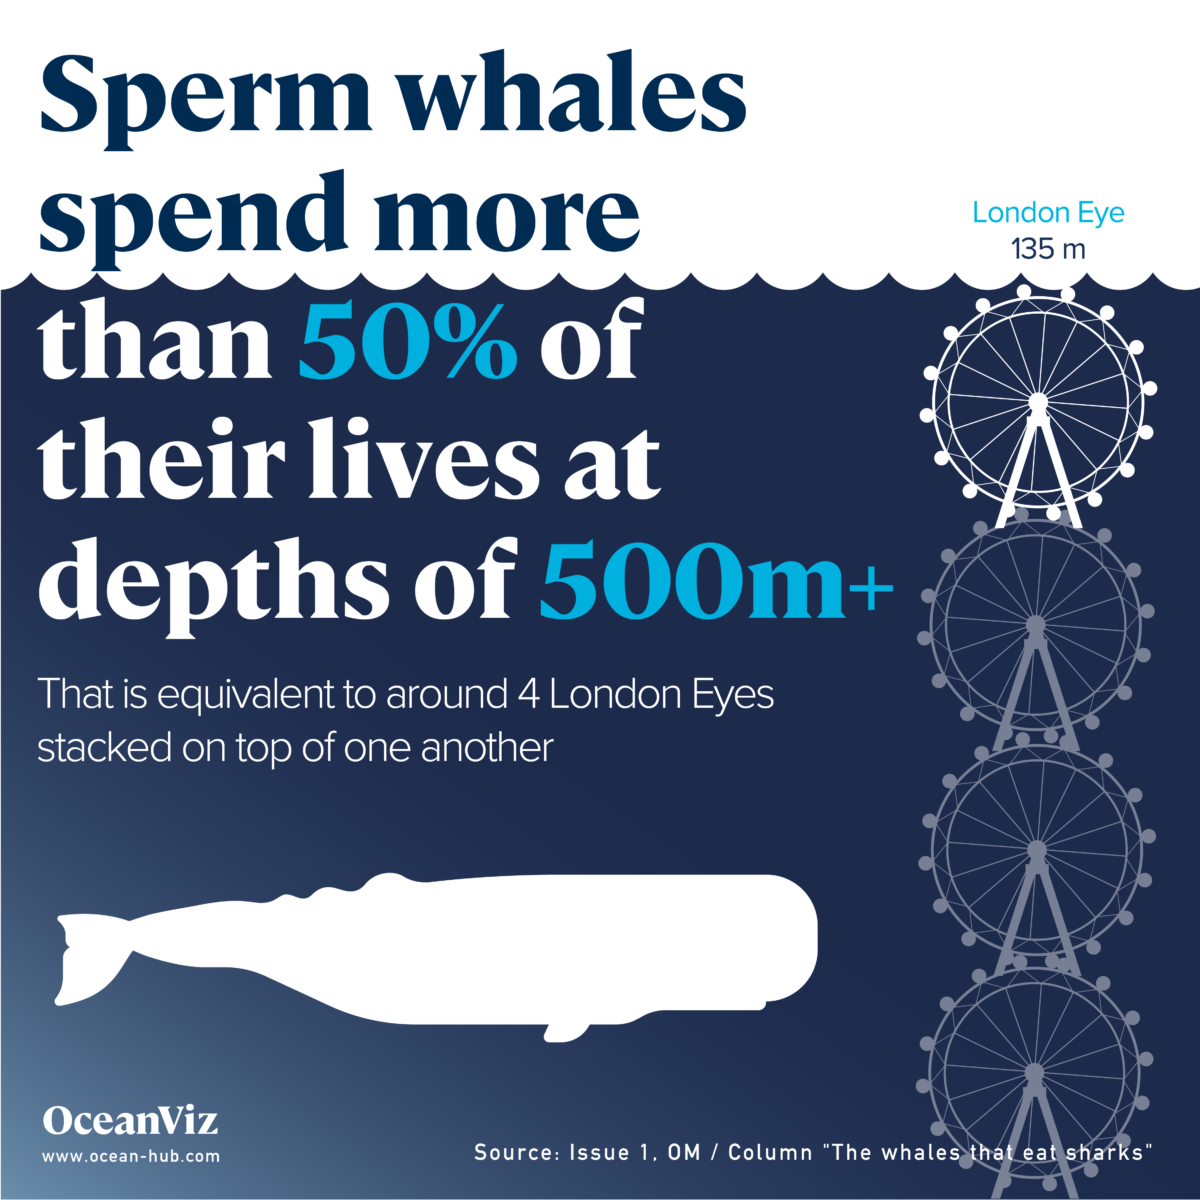 Sperm whales spend much their lives at depths of 500m